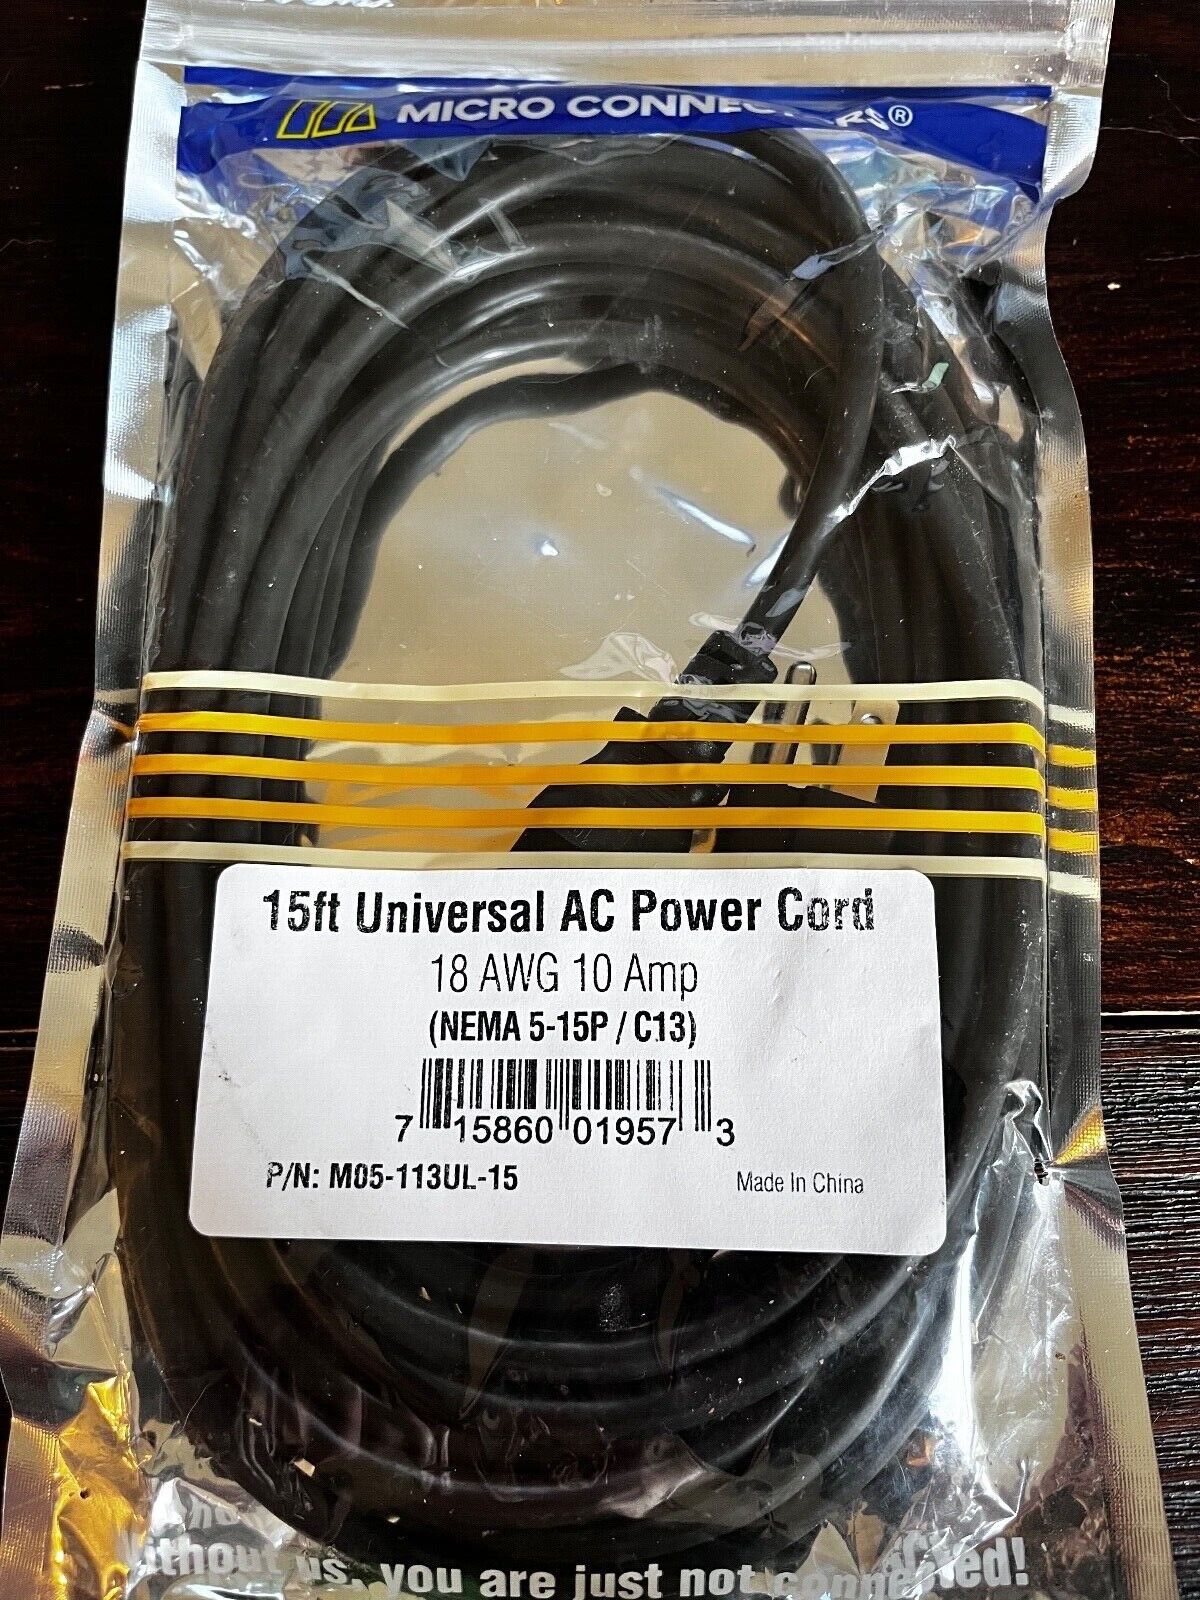 Micro Connectors, Inc. 15 feet Universal AC Power Cord UL Approved M05-113UL-15